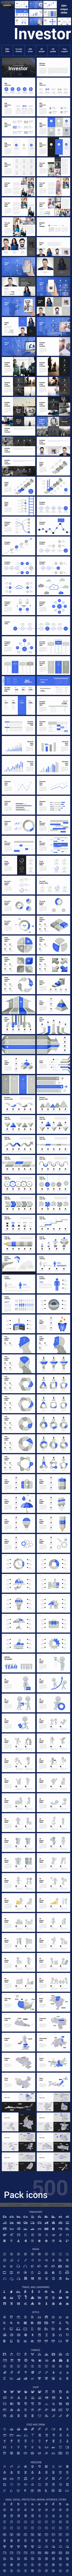 Investor Pitch Deck PowerPoint Template